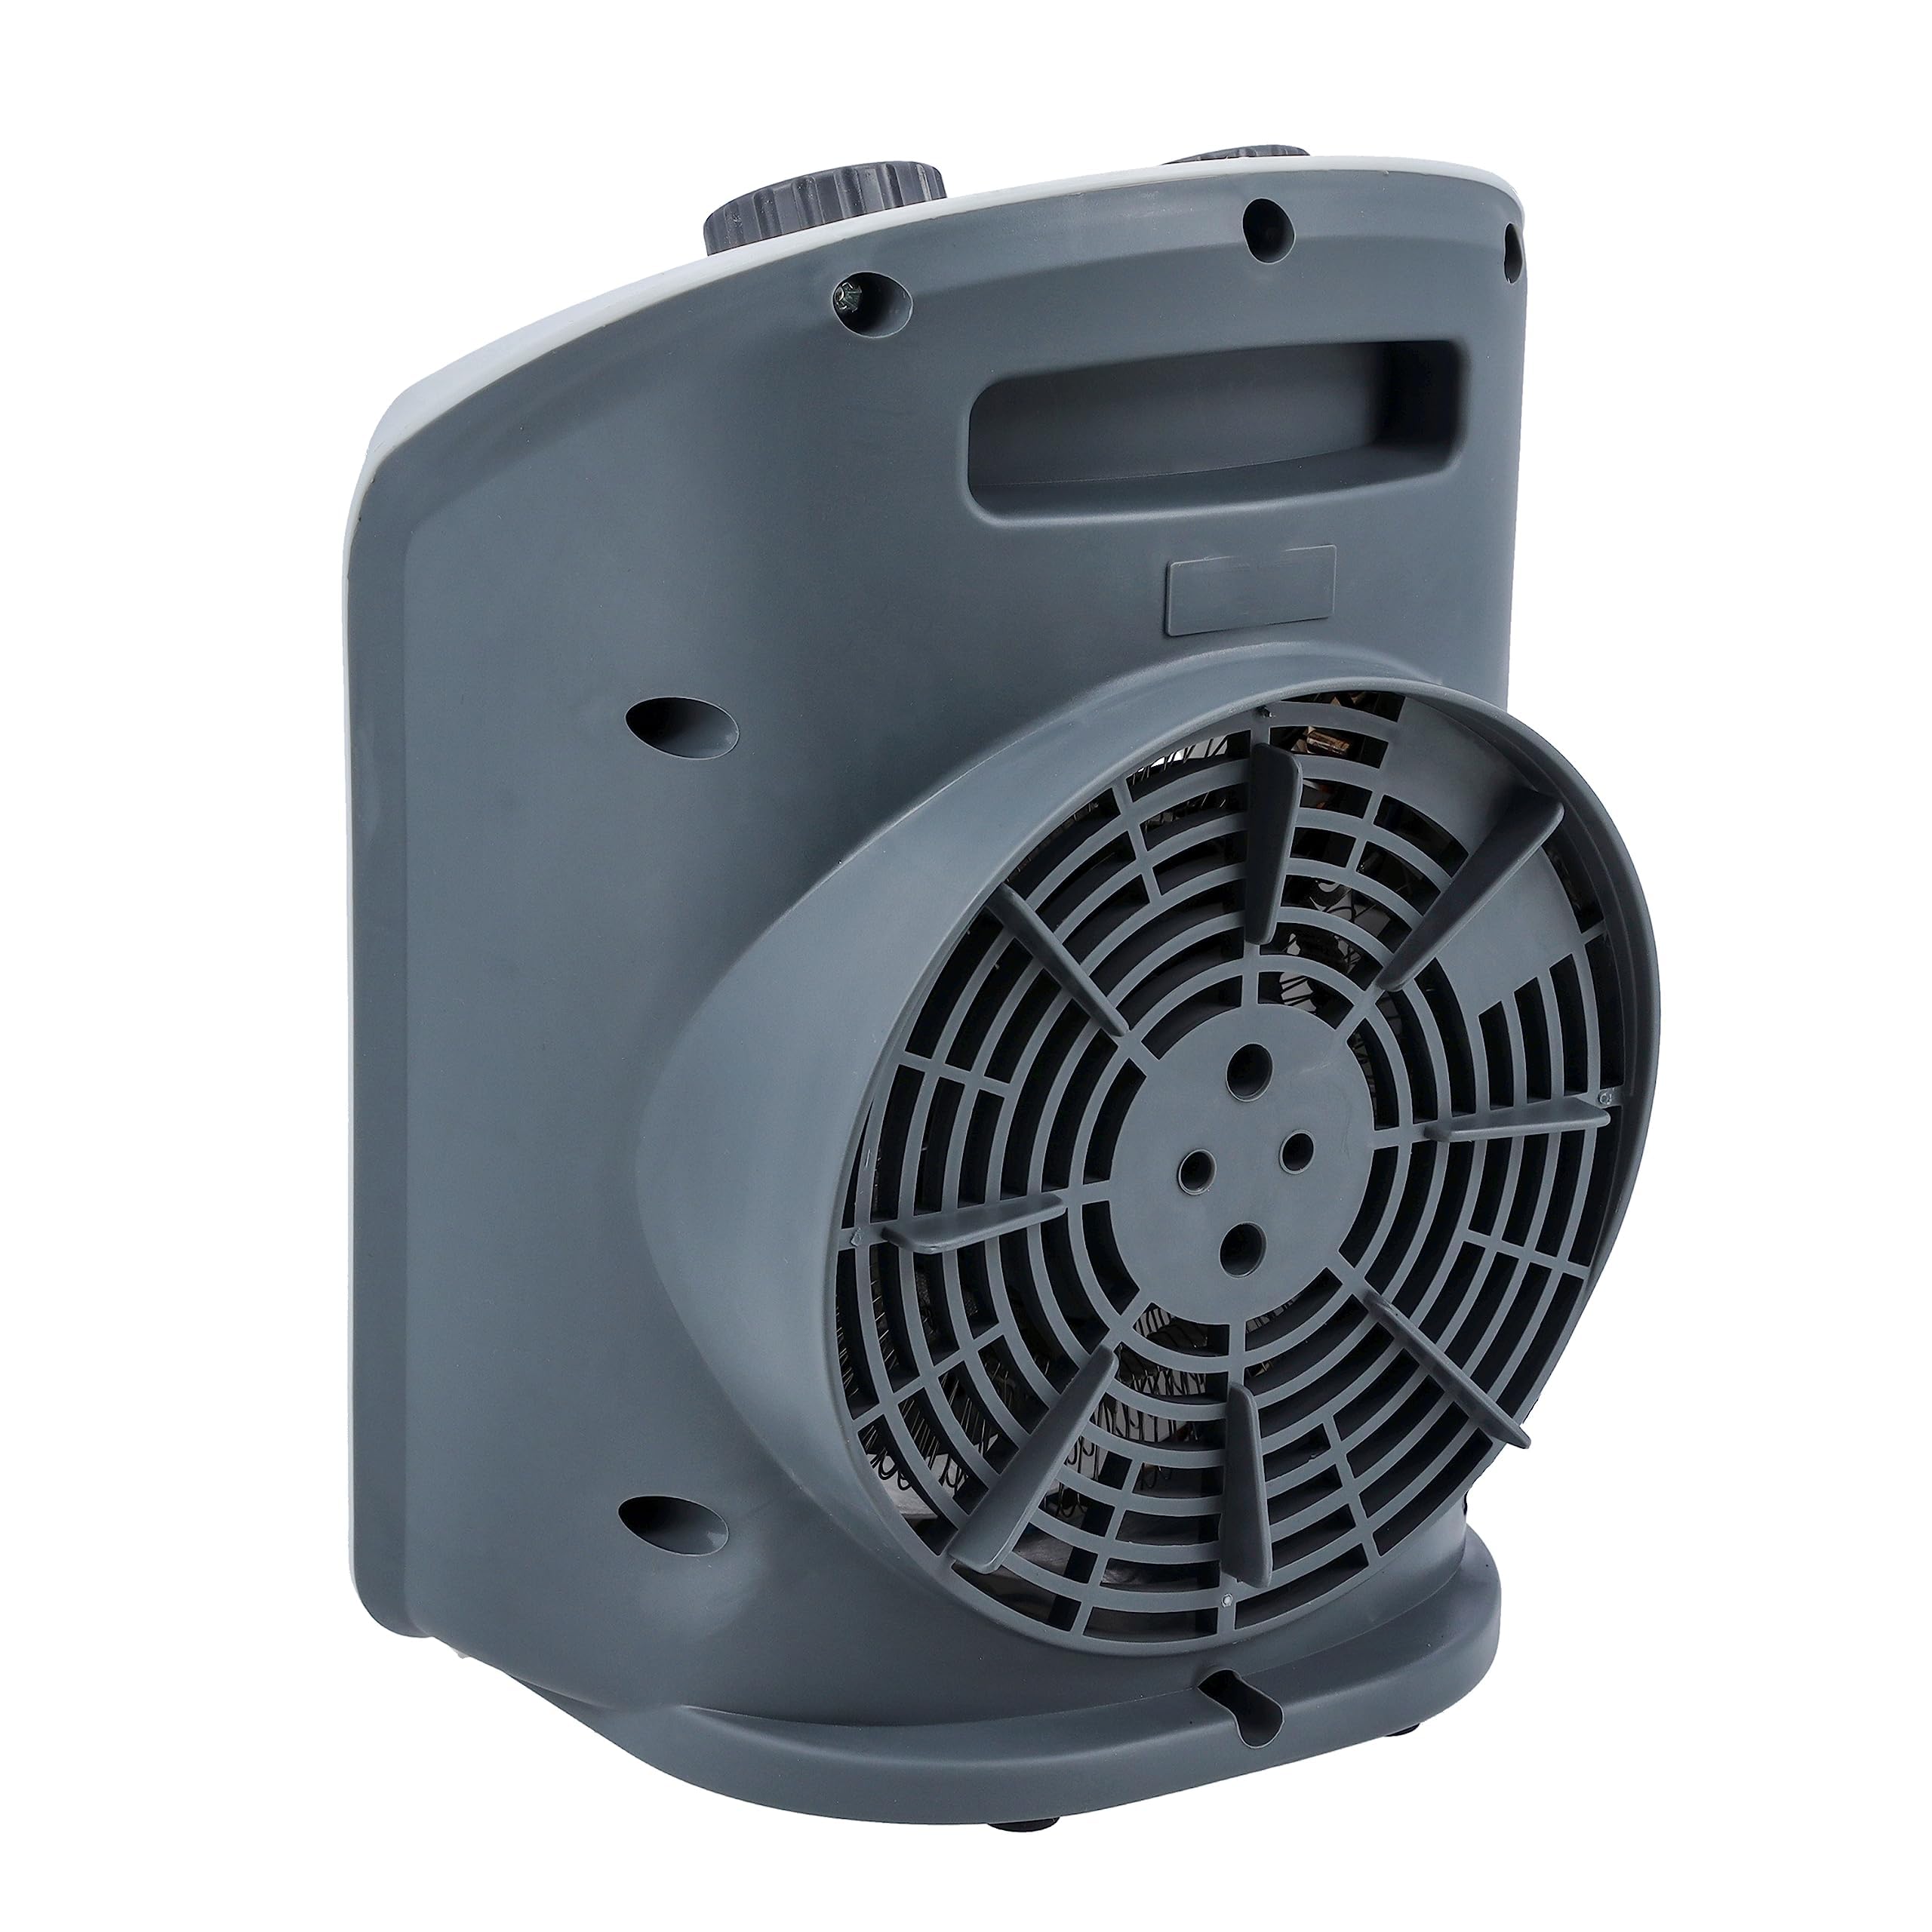 Geepas-Fan Heater with 2 Heat Setting, GFH28520 | Adjustable Thermostat | Cold/Warm/Hot Wind Selection | Overheat Protection | Power Indicator Light